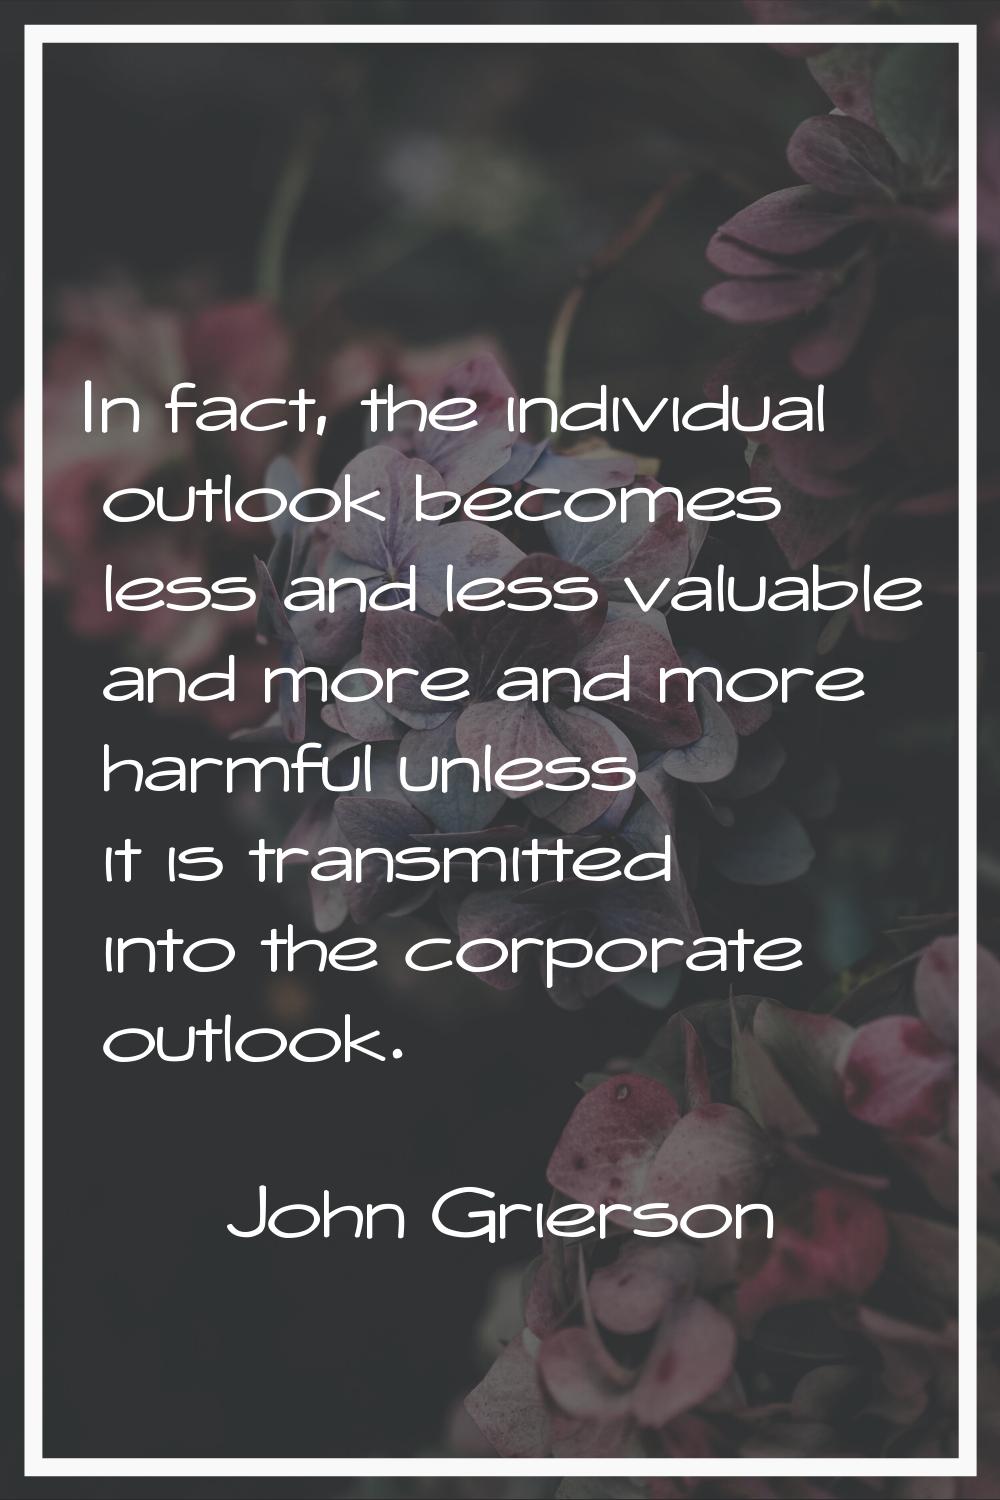 In fact, the individual outlook becomes less and less valuable and more and more harmful unless it 